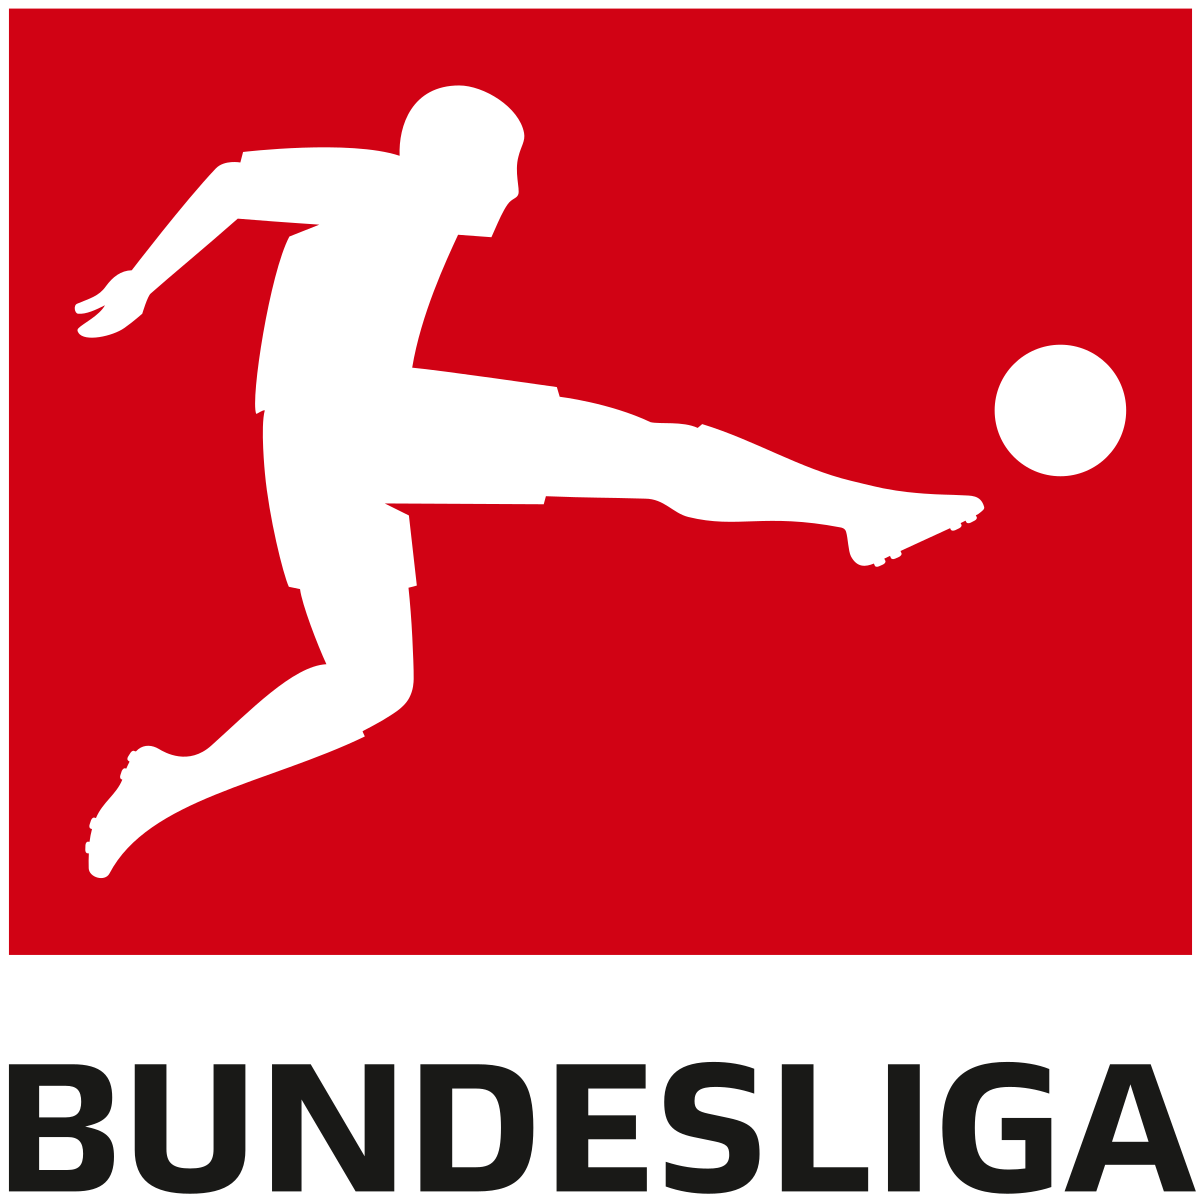 0A590091 3DC0 4BC5 B298 F20607EC71E9 - <strong><u>Bundesliga players have grown 8.9% Older in the last 10 seasons </u></strong>